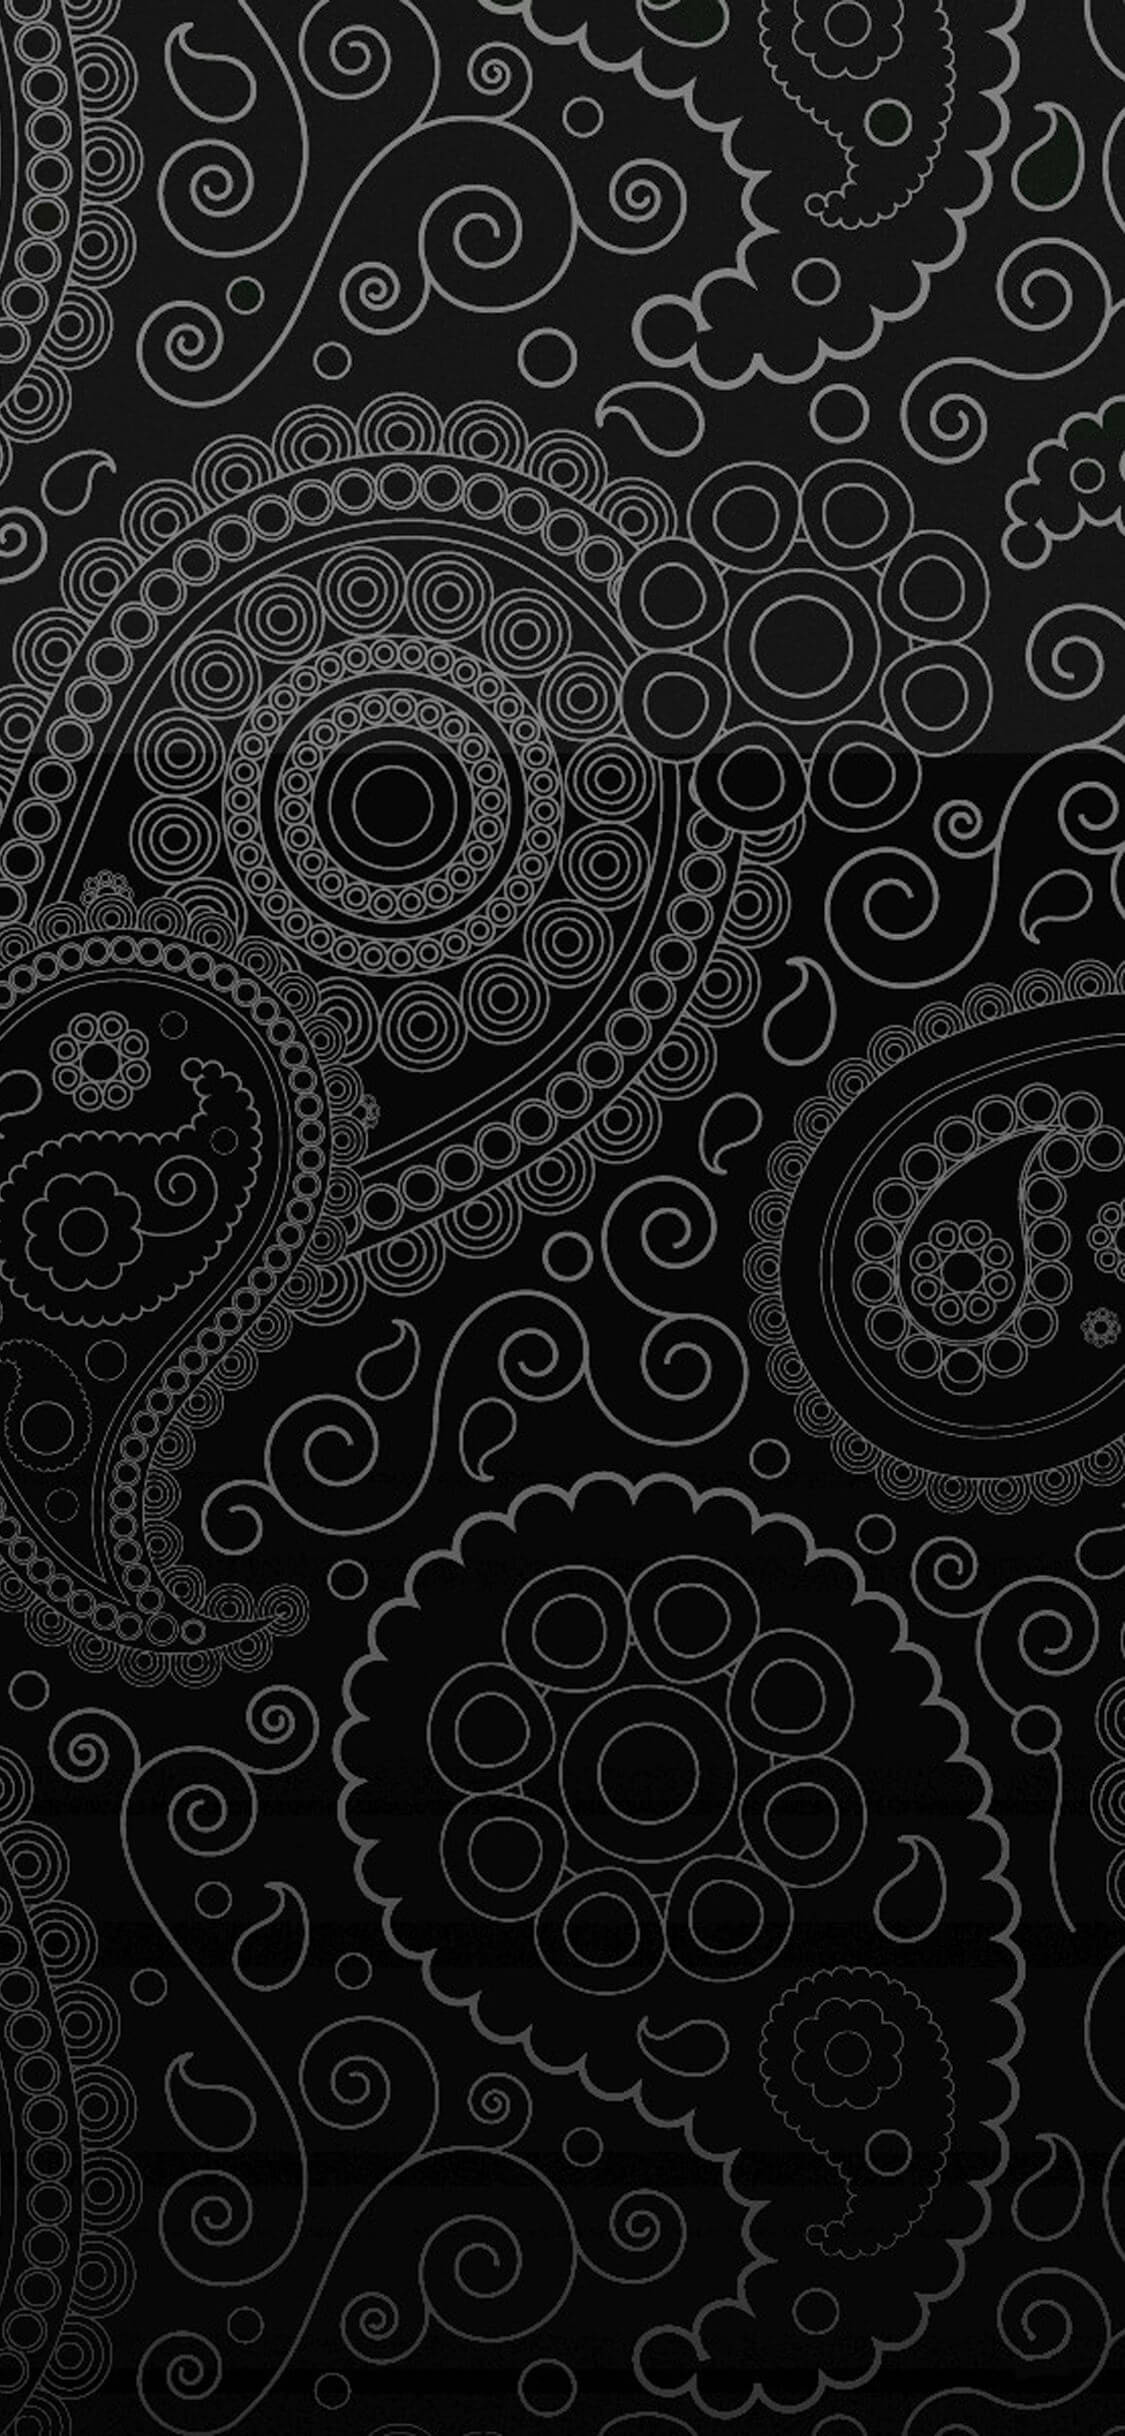 50+ Stunning Black Wallpapers For Your iPhone - Templatefor